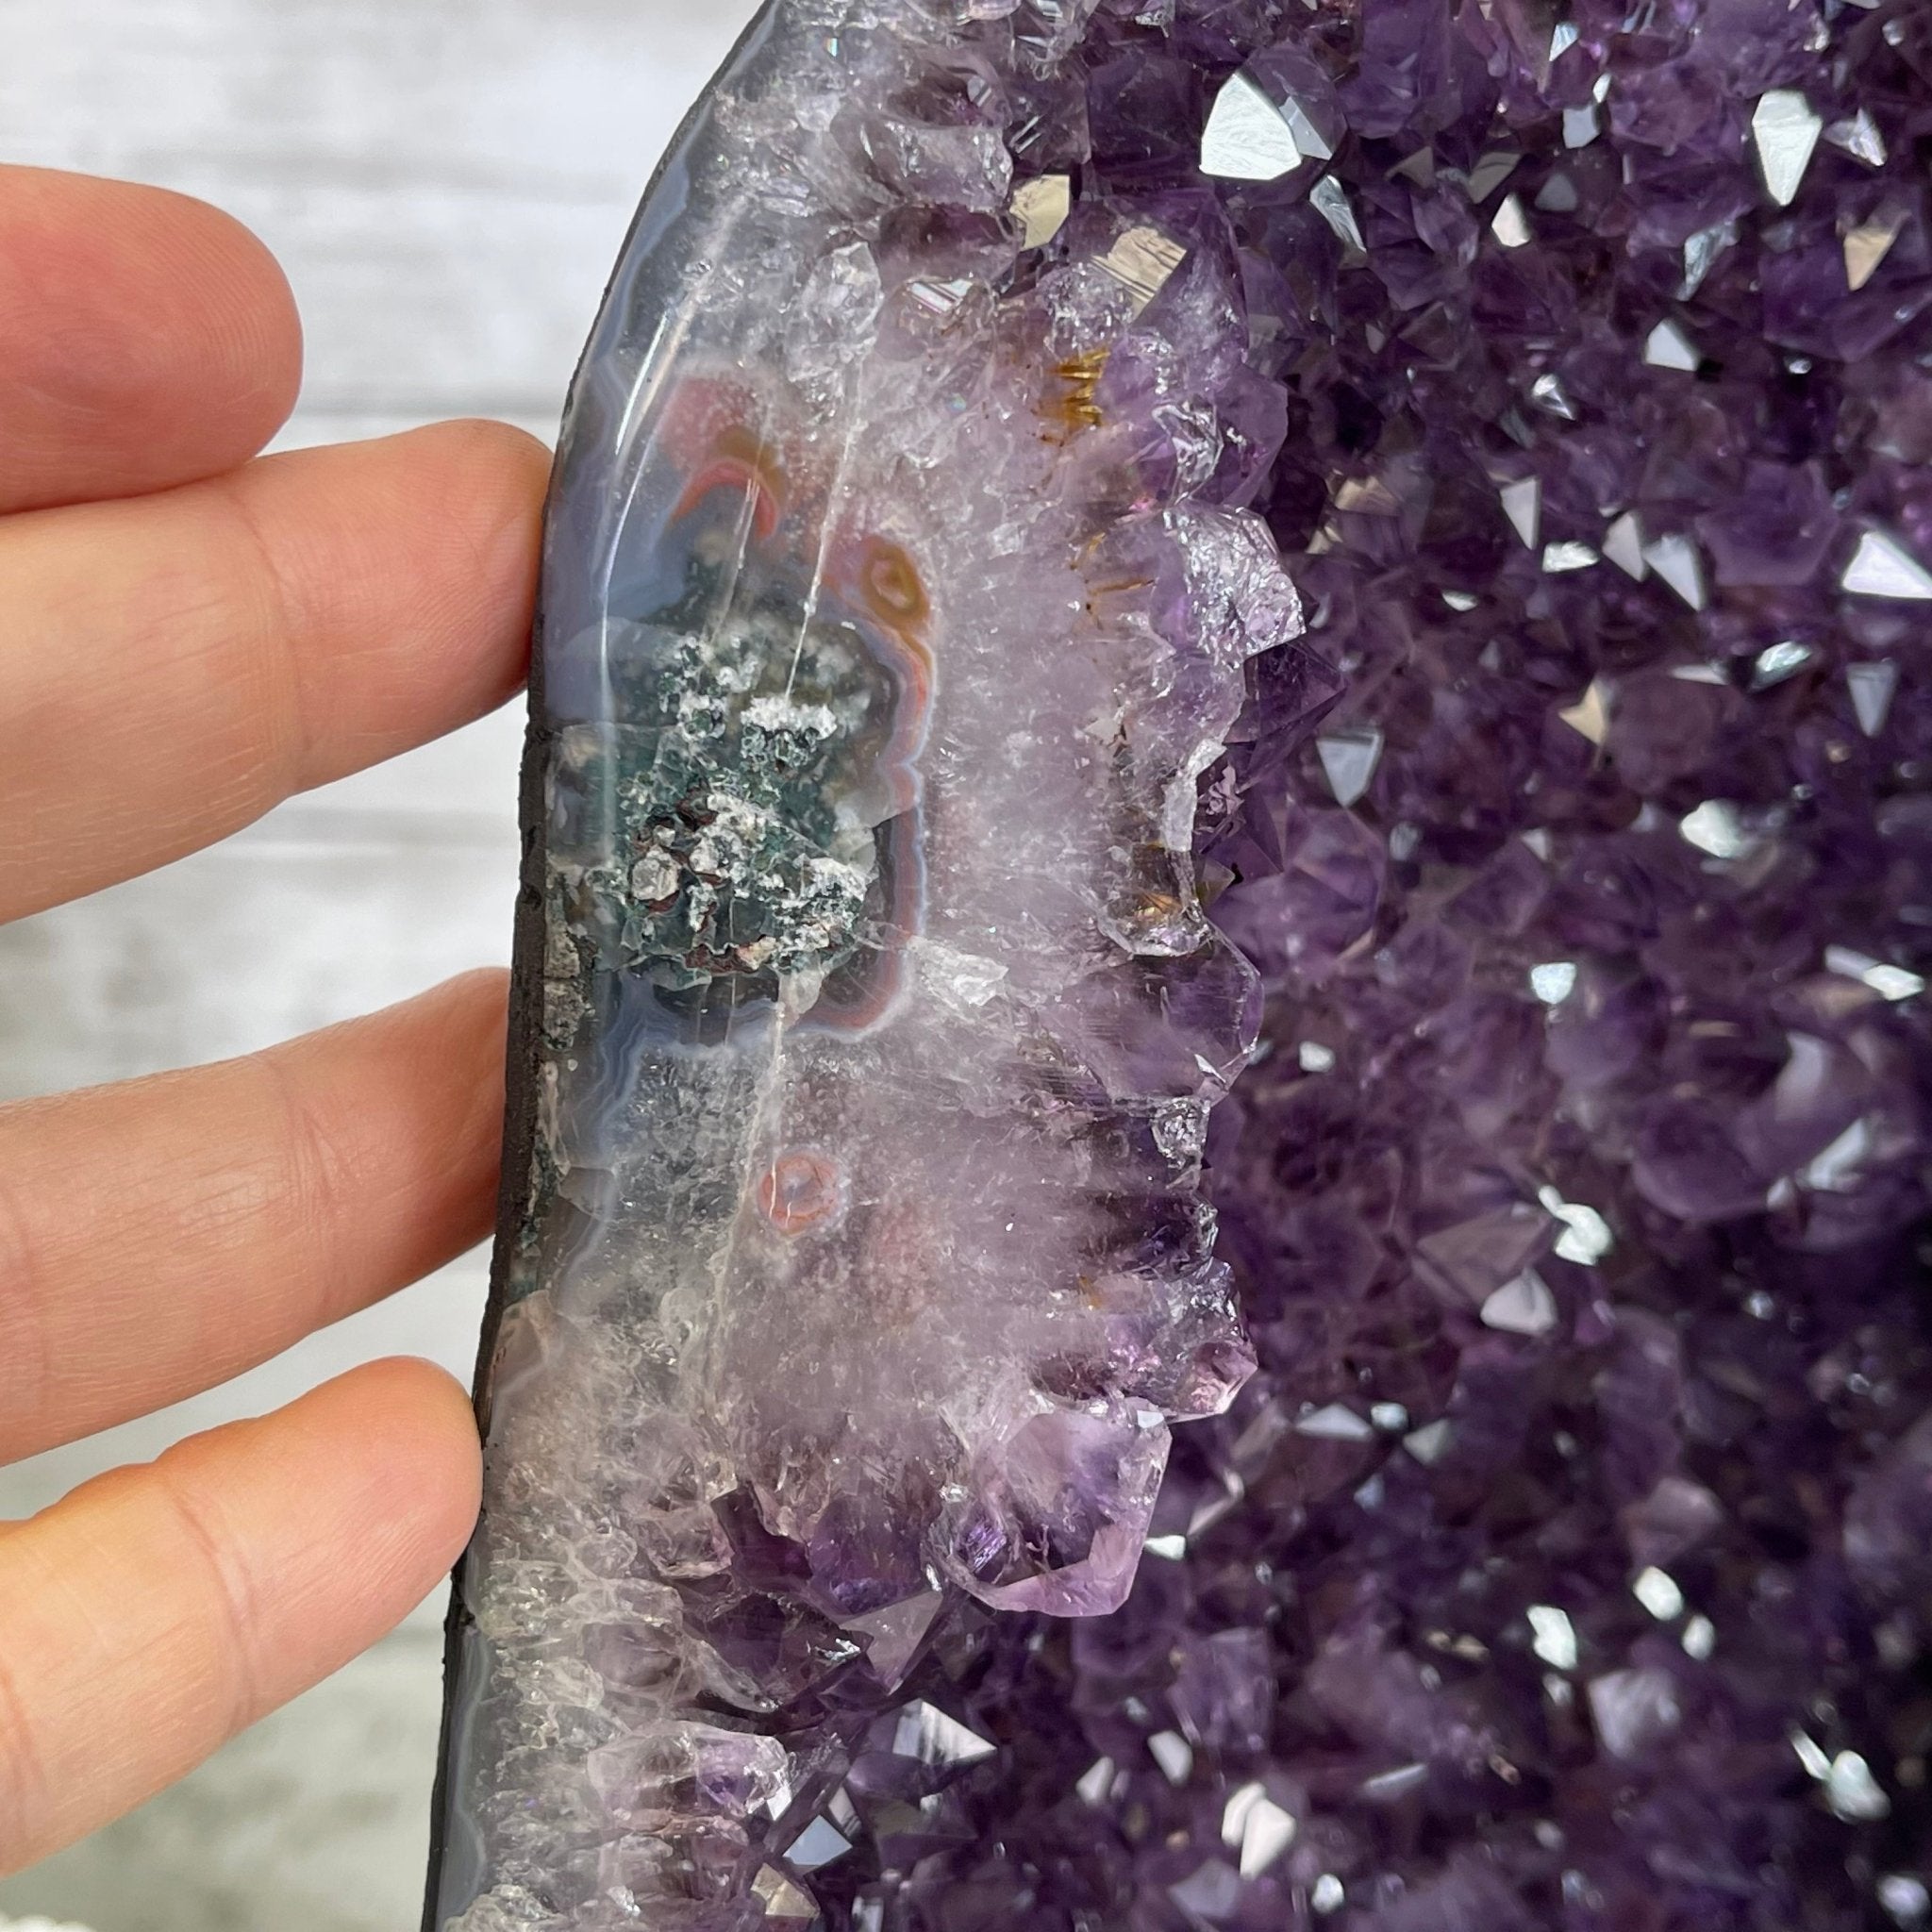 Super Quality Brazilian Amethyst Cathedral, 50.1 lbs & 17" Tall #5601-0849 by Brazil Gems - Brazil GemsBrazil GemsSuper Quality Brazilian Amethyst Cathedral, 50.1 lbs & 17" Tall #5601-0849 by Brazil GemsCathedrals5601-0849